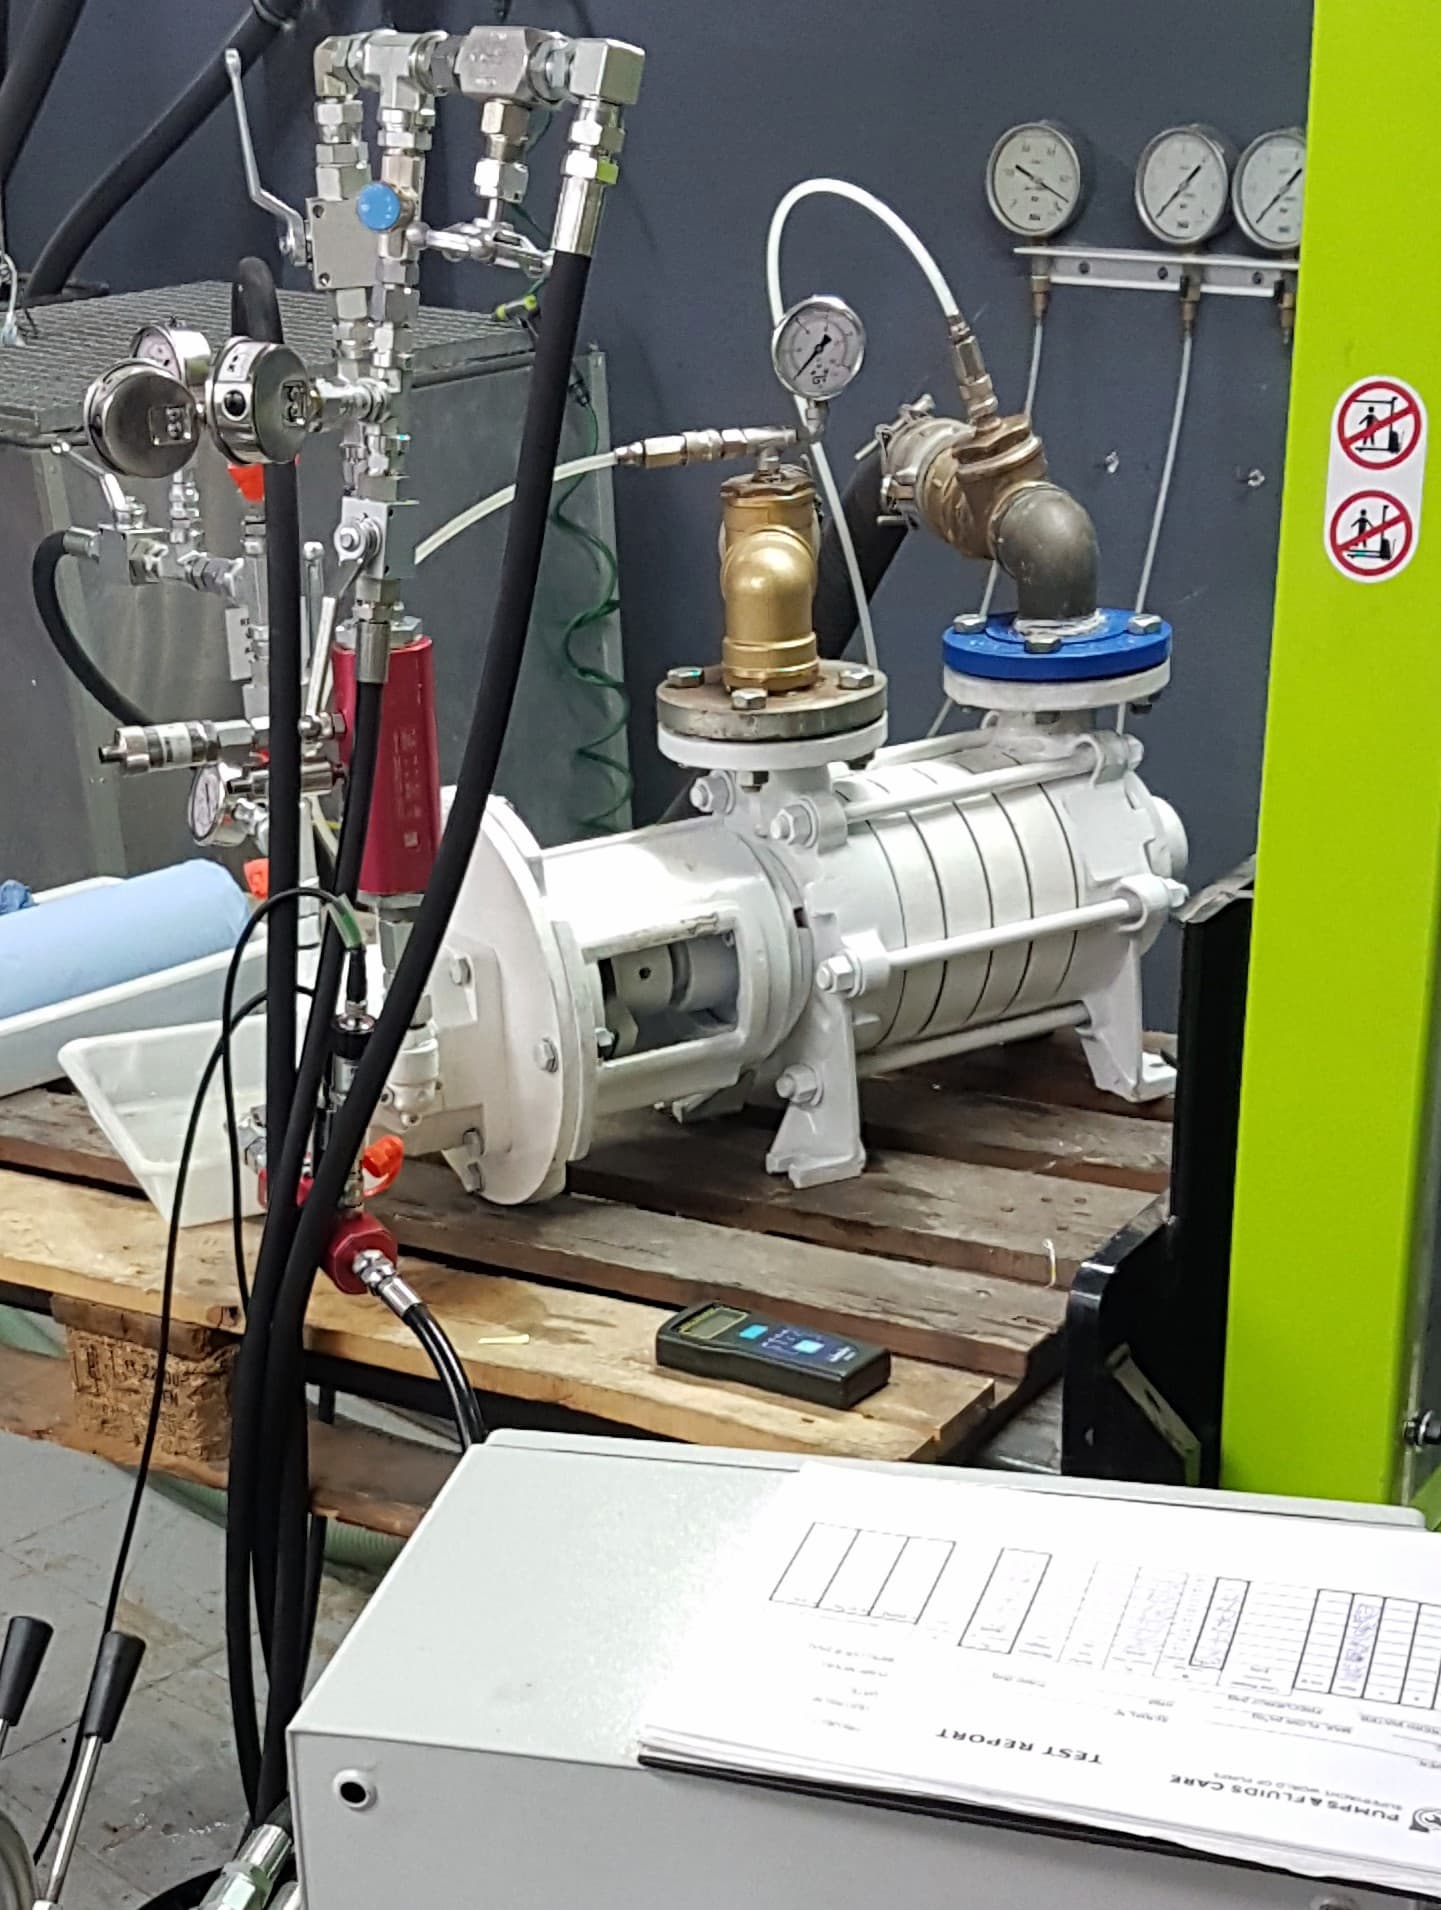 PUMP PERFORMANCE TESTING - hydraulic performance test report complete with data points and Qh curve